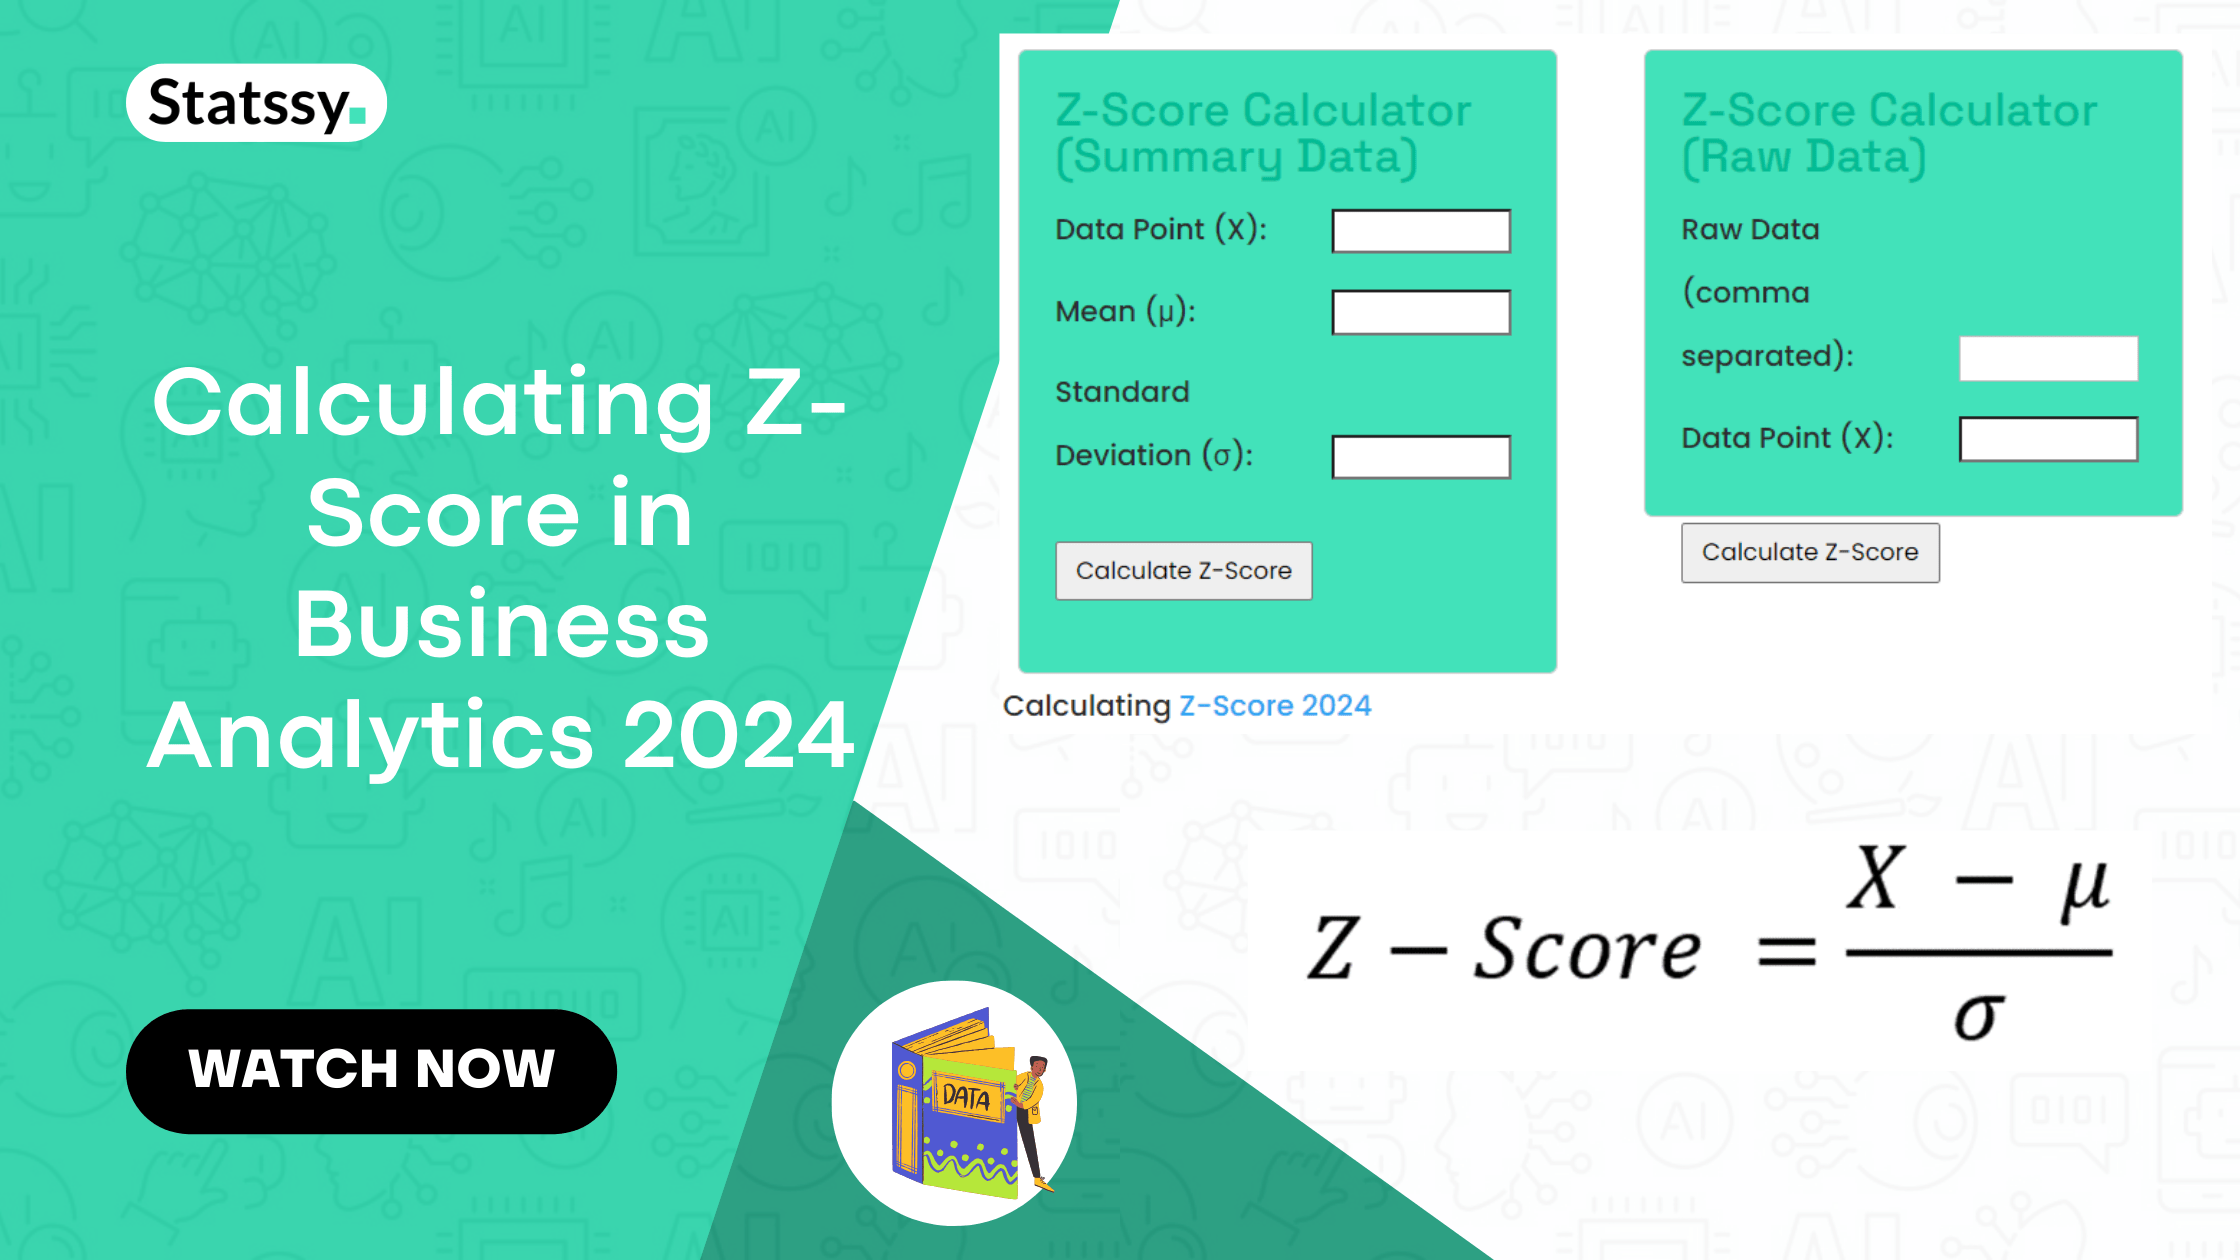 Calculating Z-Score in Business Analytics 2024